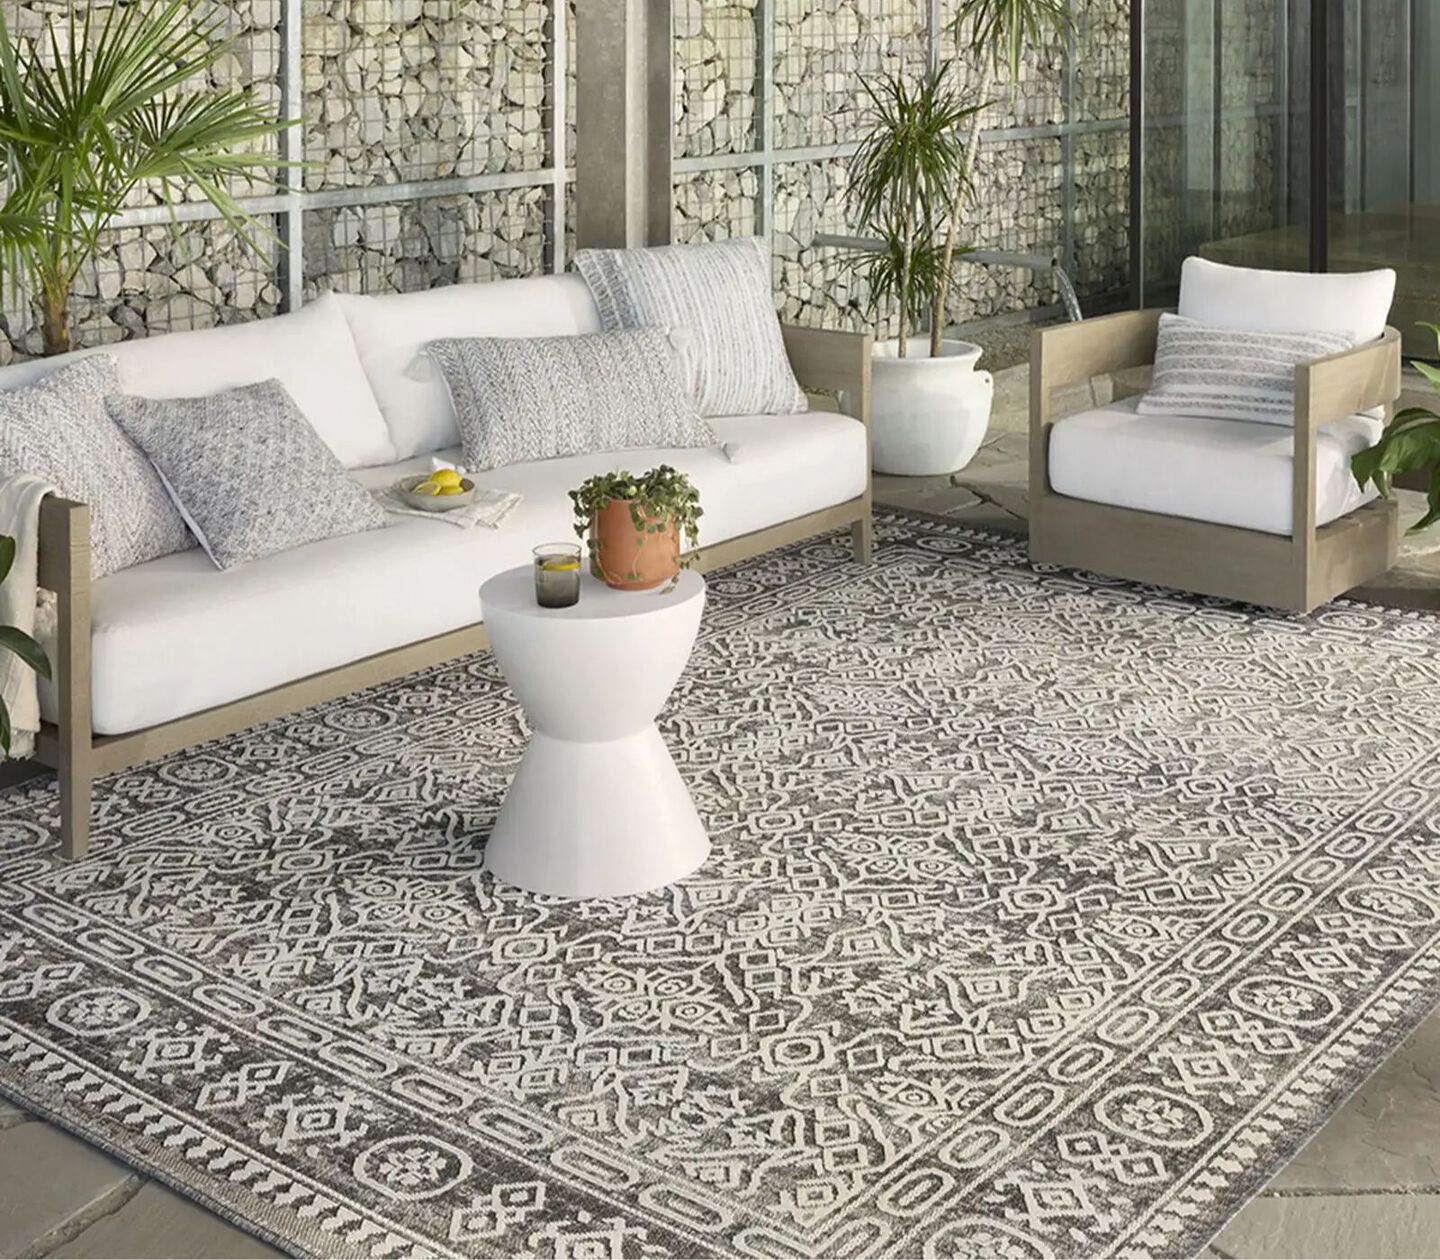 Beige and white outdoor patio sofa sitting on a grey and white rug